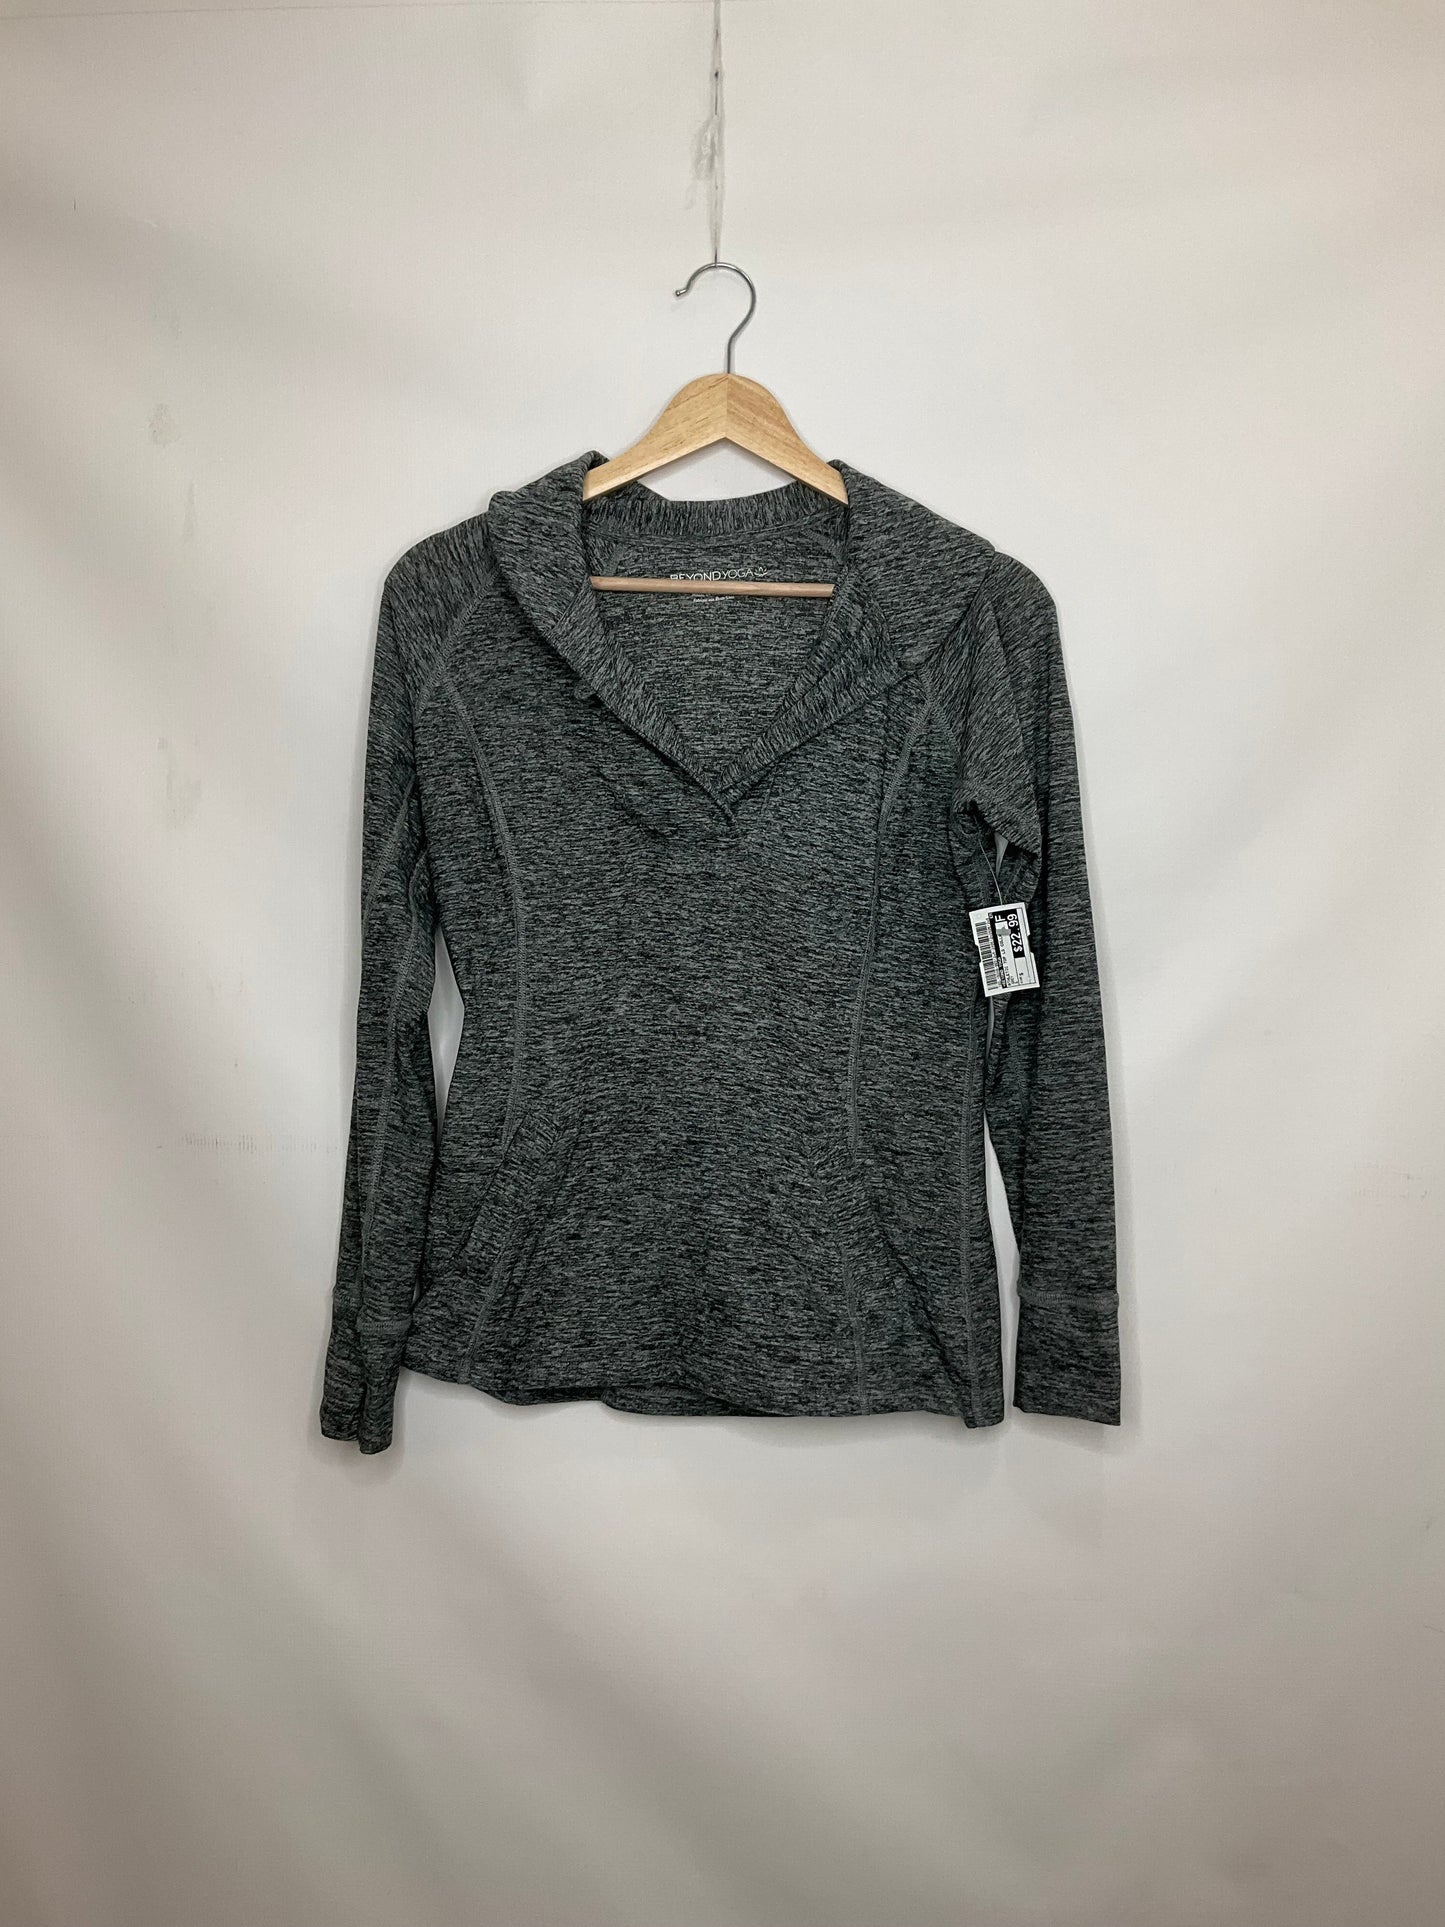 Grey Athletic Top Long Sleeve Collar Beyond Yoga, Size S